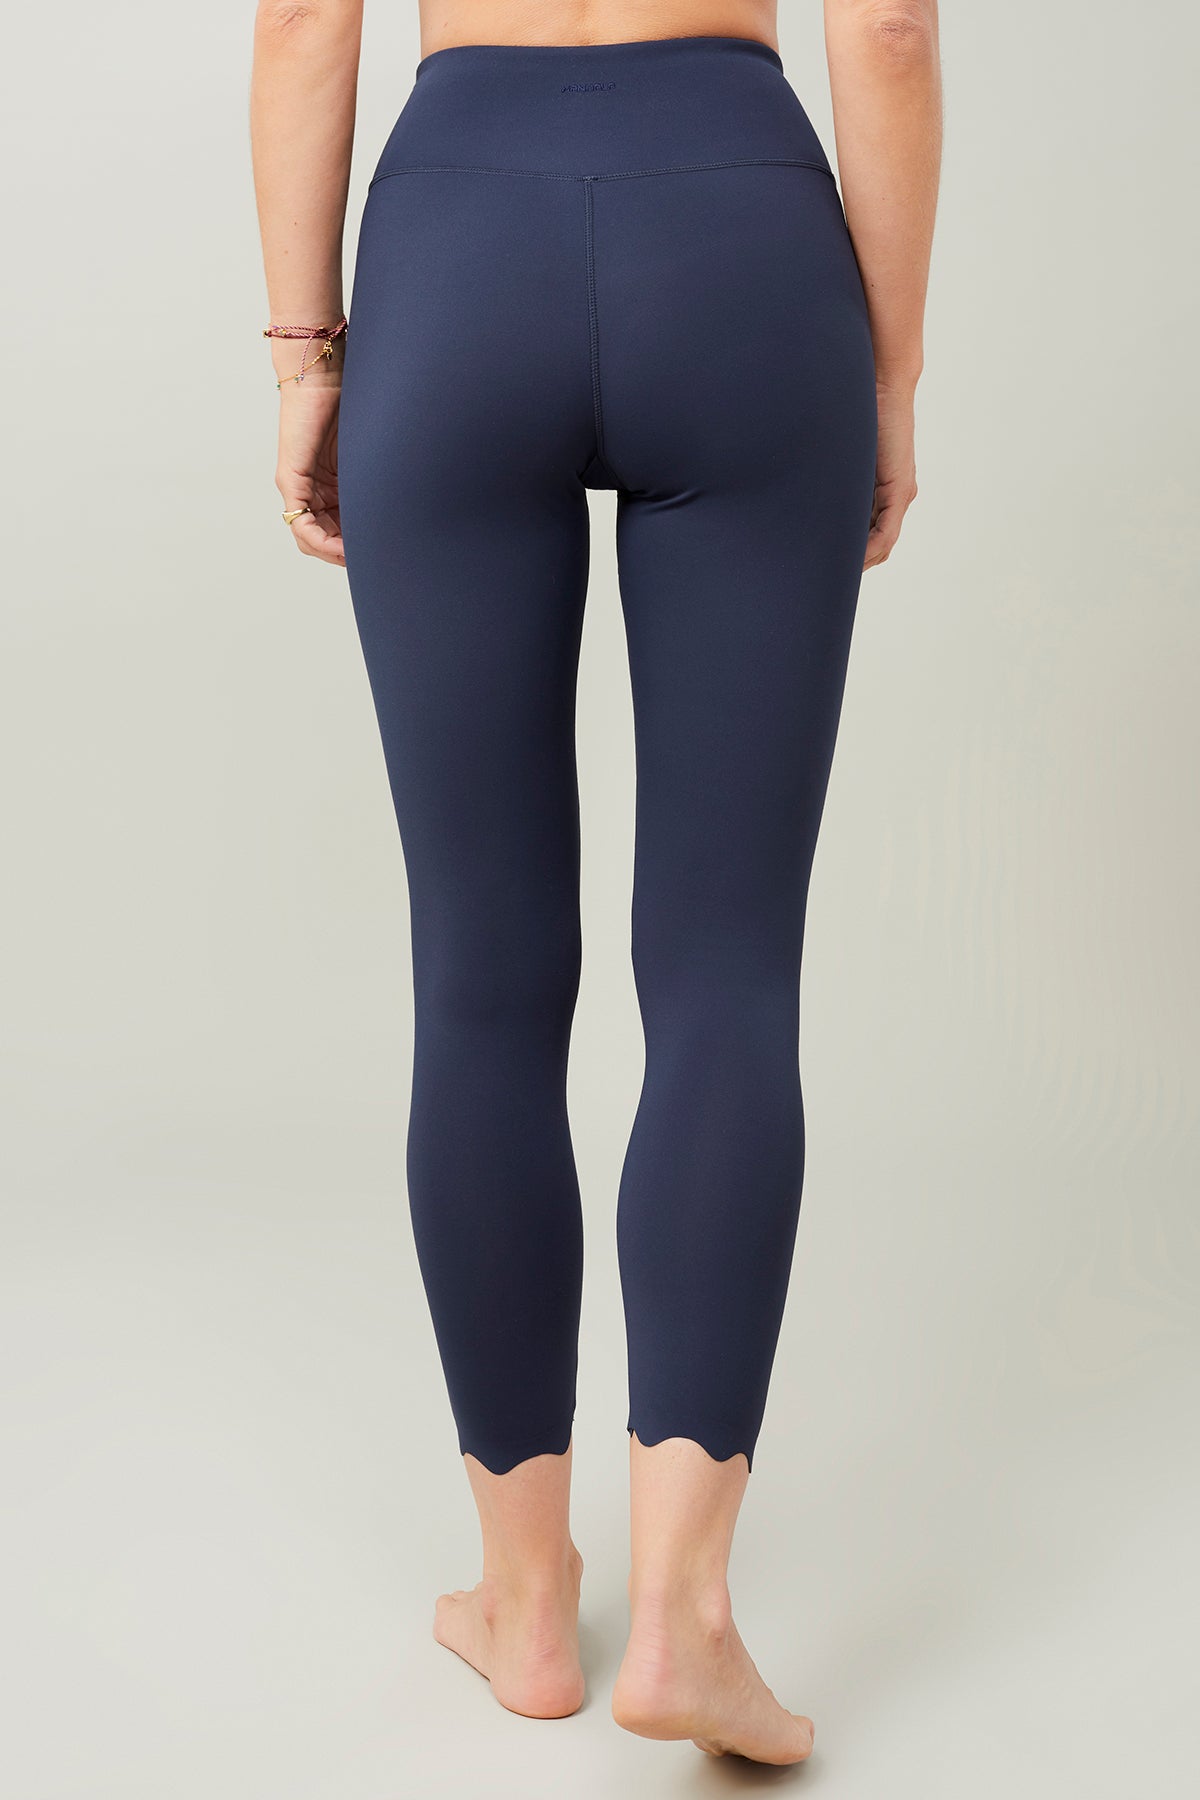 Sustainable yoga pants for curvy women by MANDALA – Page 2